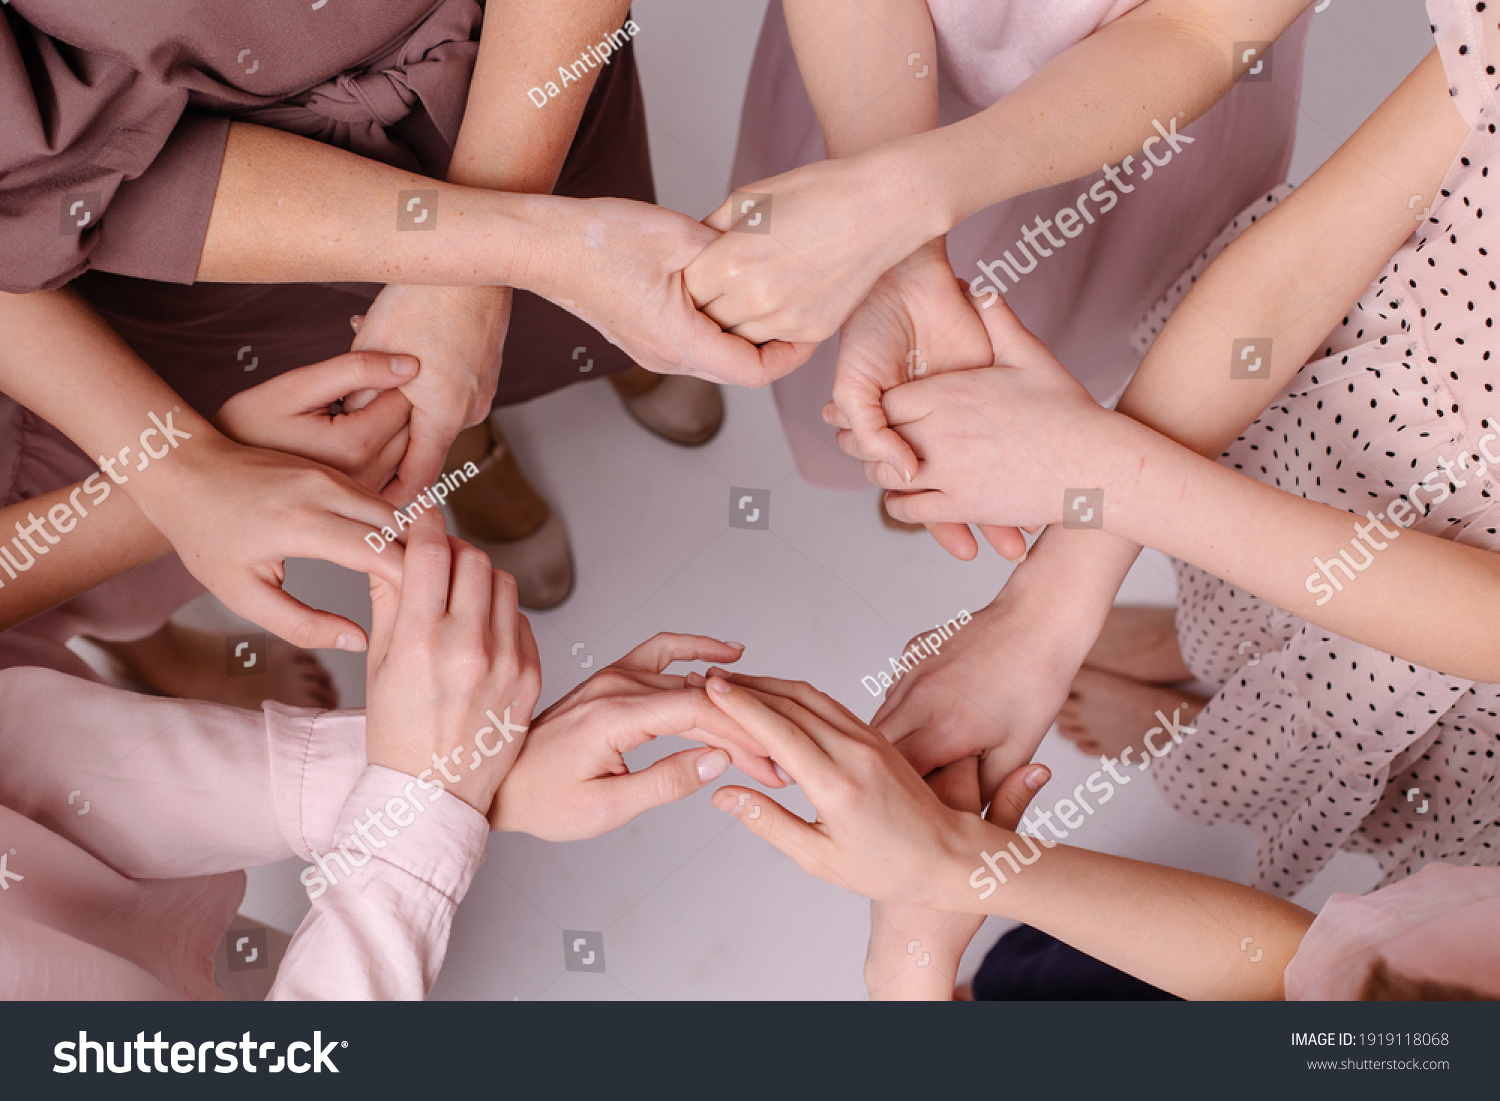 circle from female hands. Feminism nursing support concept. Together women help each other. Gently touch. Carefully. Partnership friends. Tactility. Offline communication togetherness. Gentle tones #1919118068